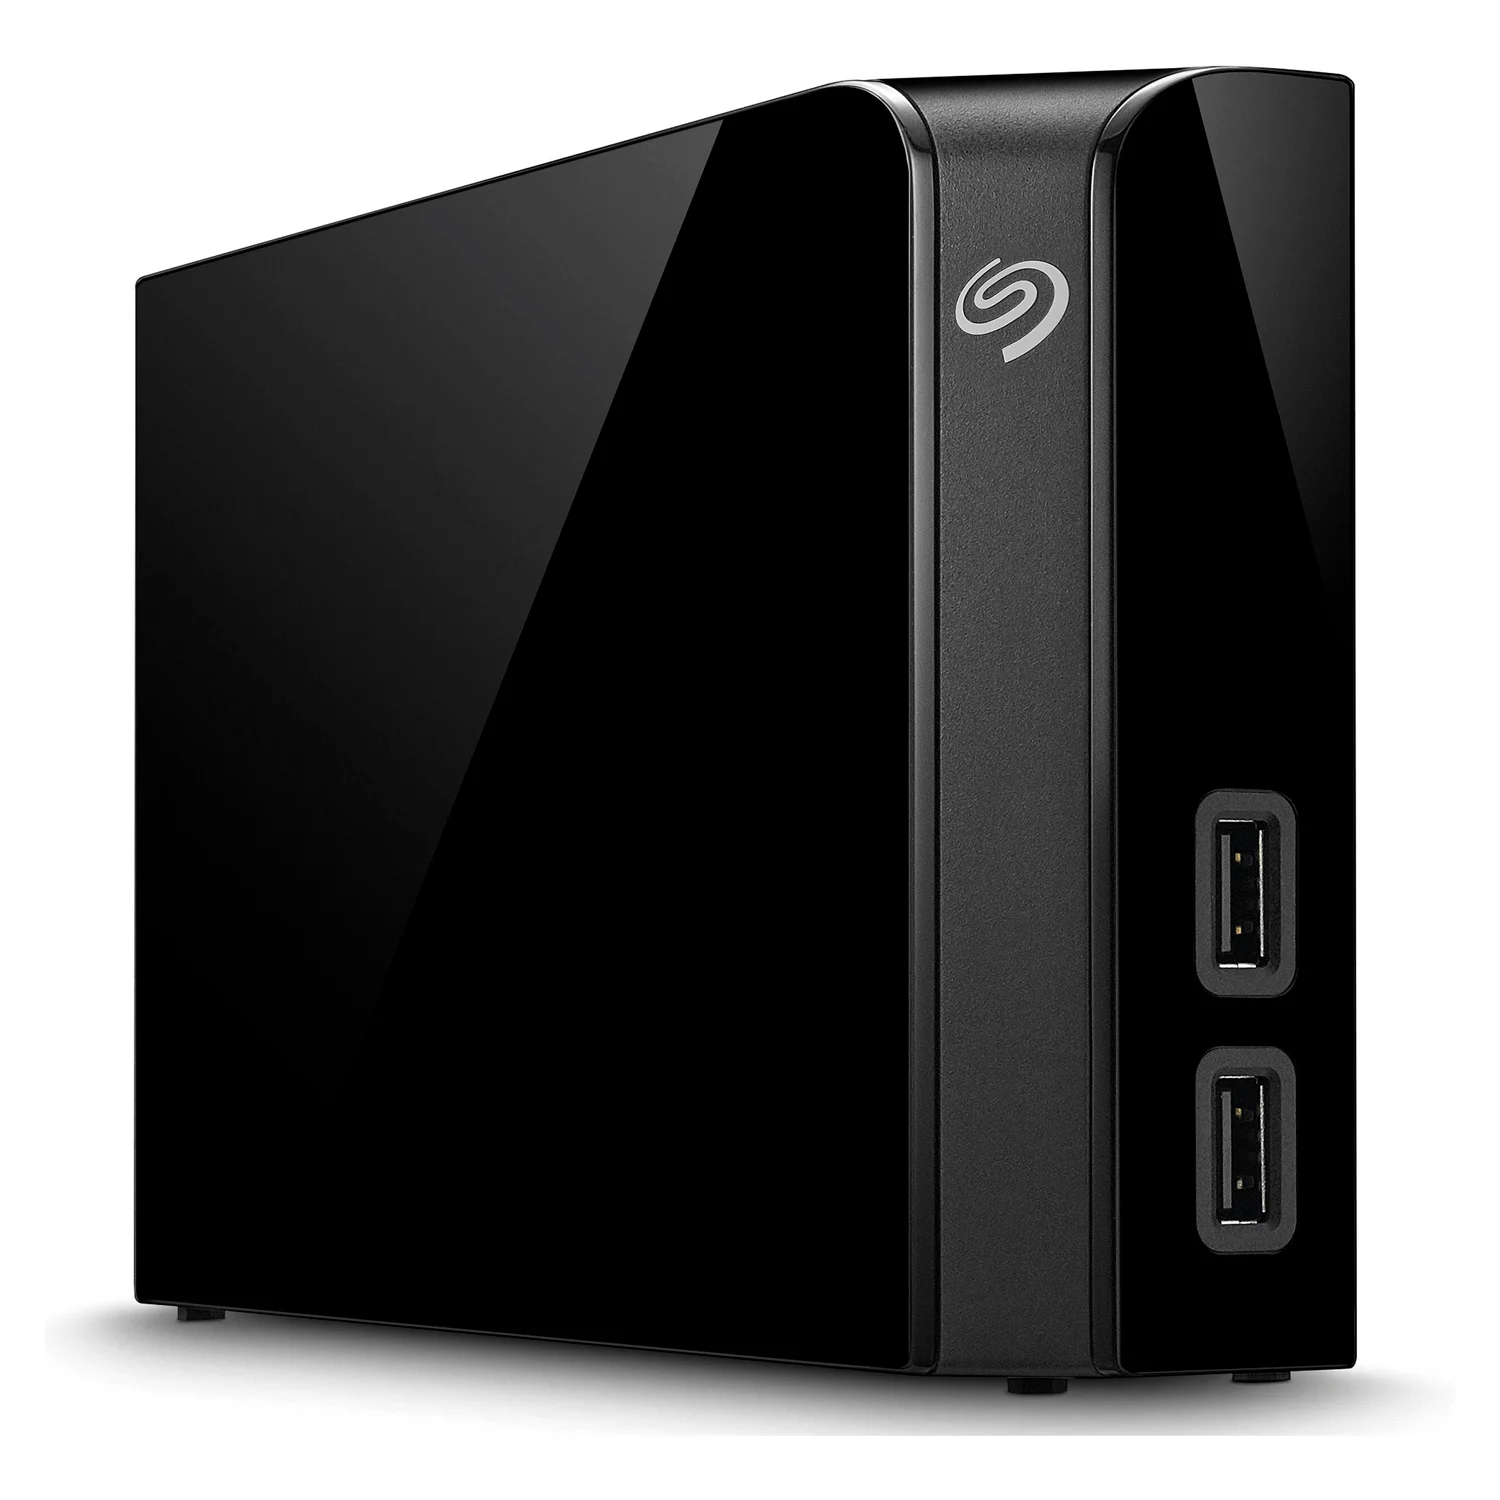 HD Externo Seagate Expansion Backup Plus 14TB - (STEL14000400)